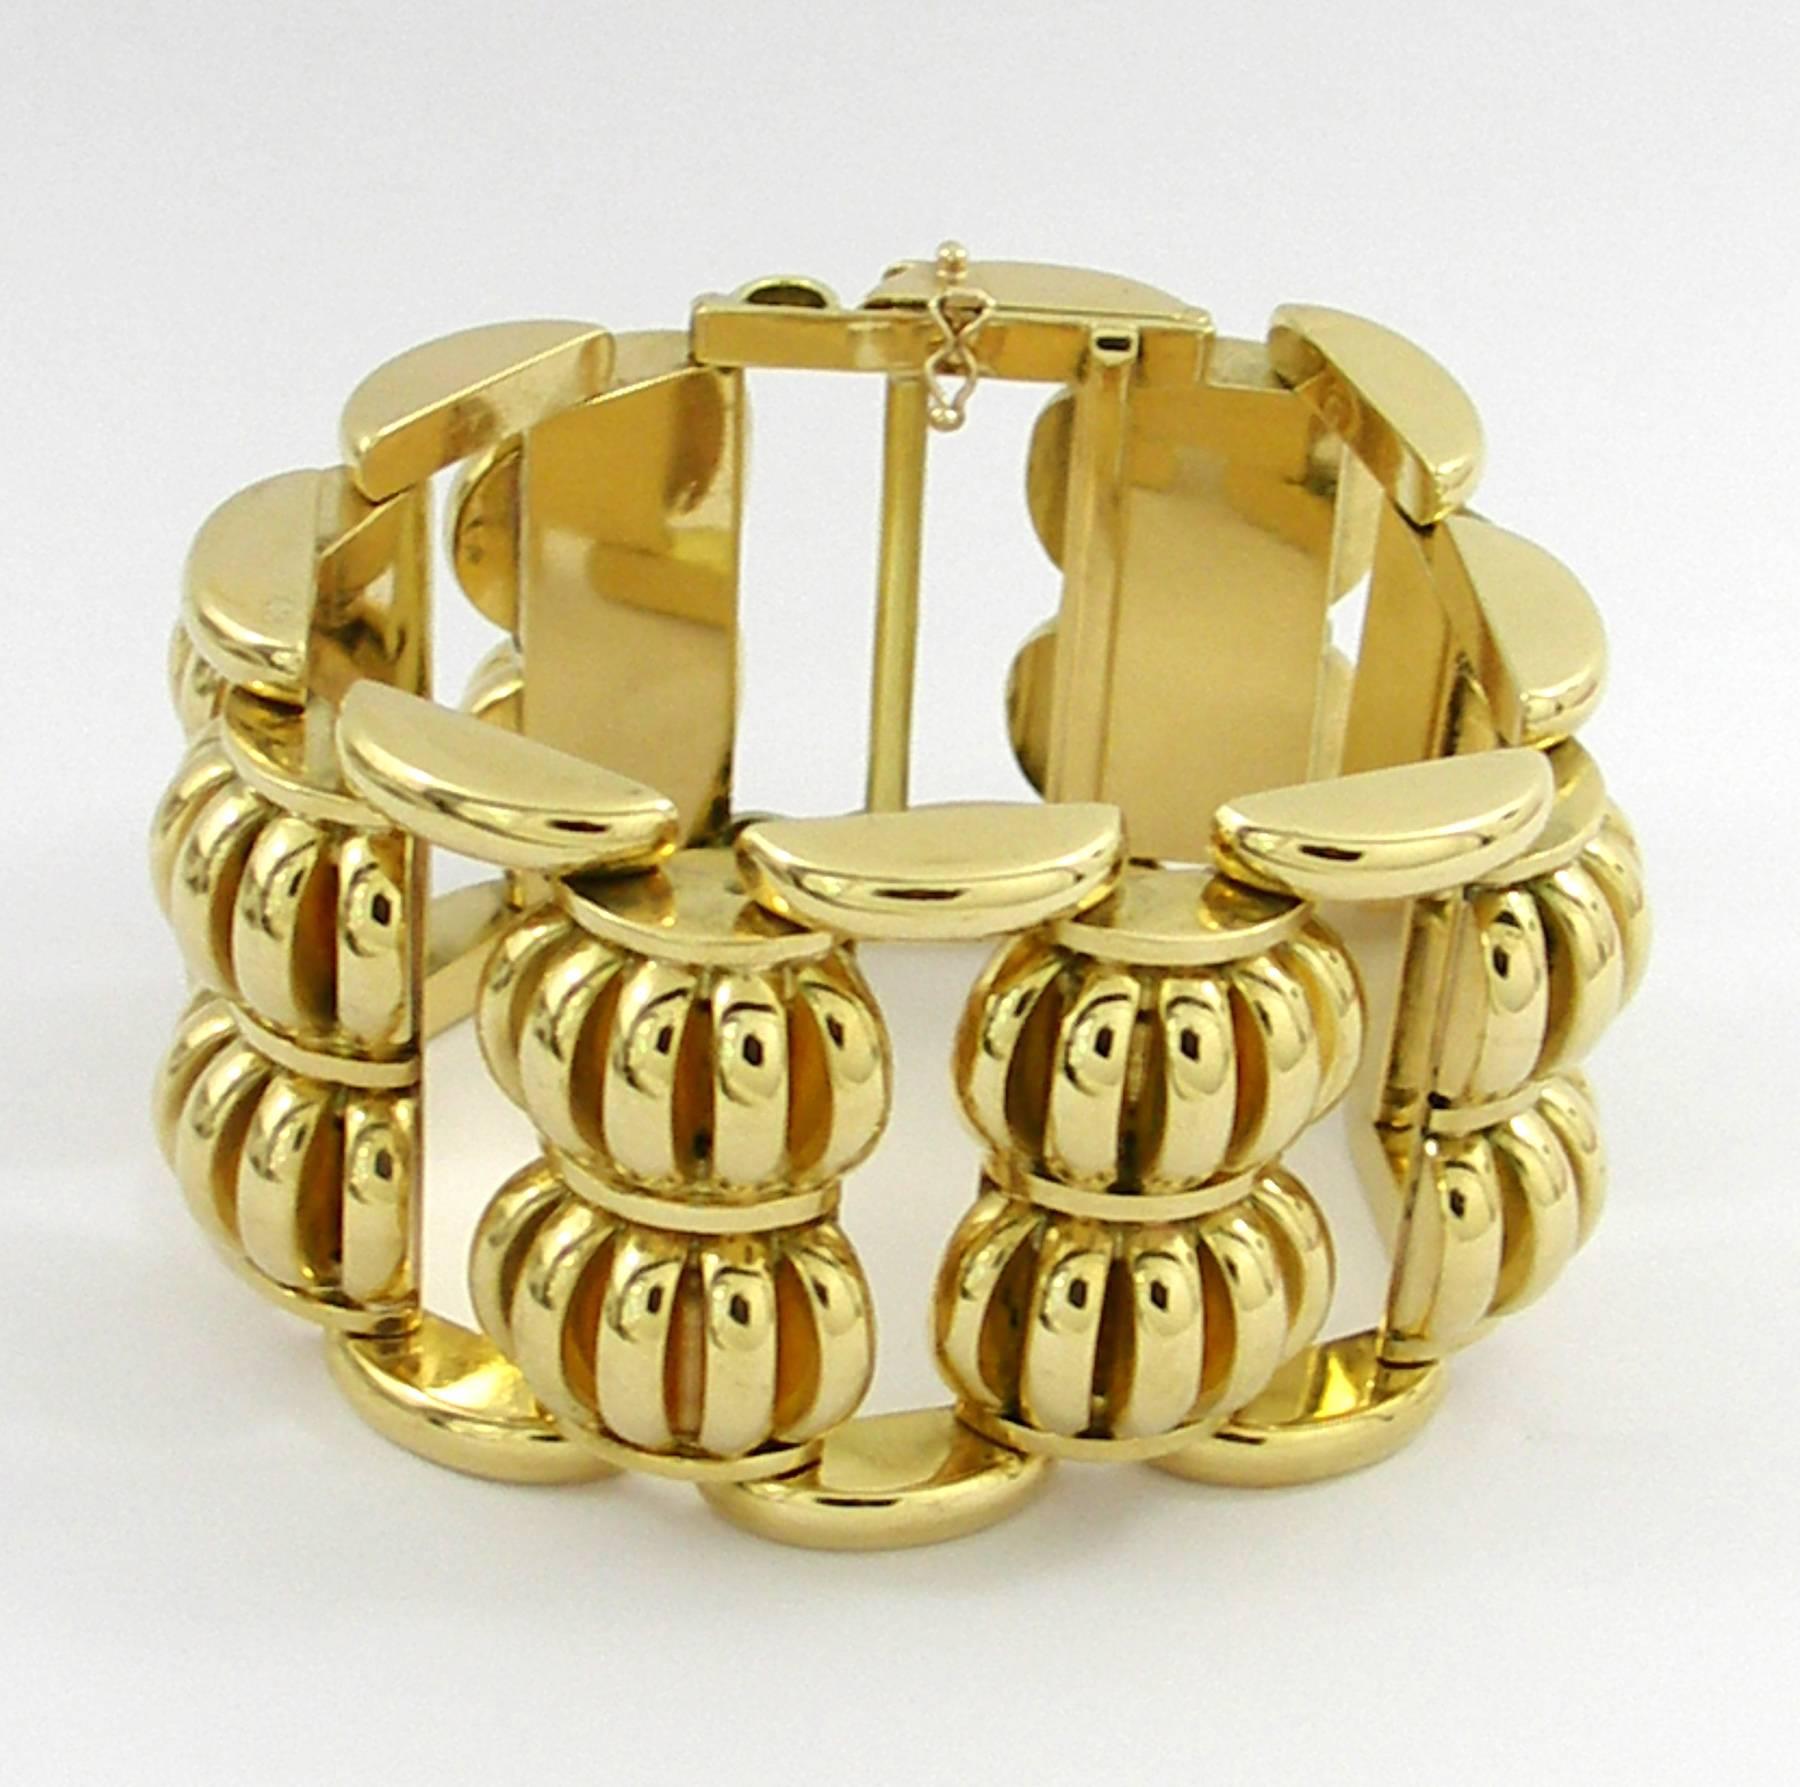 An 18K yellow gold bracelet comprised of half moon links with half disc designs fanning out. Lining the edges and connecting the bombe' links are half oval connectors. Each connector stands 3/8 of an inch tall, while the connectors measure 1/4